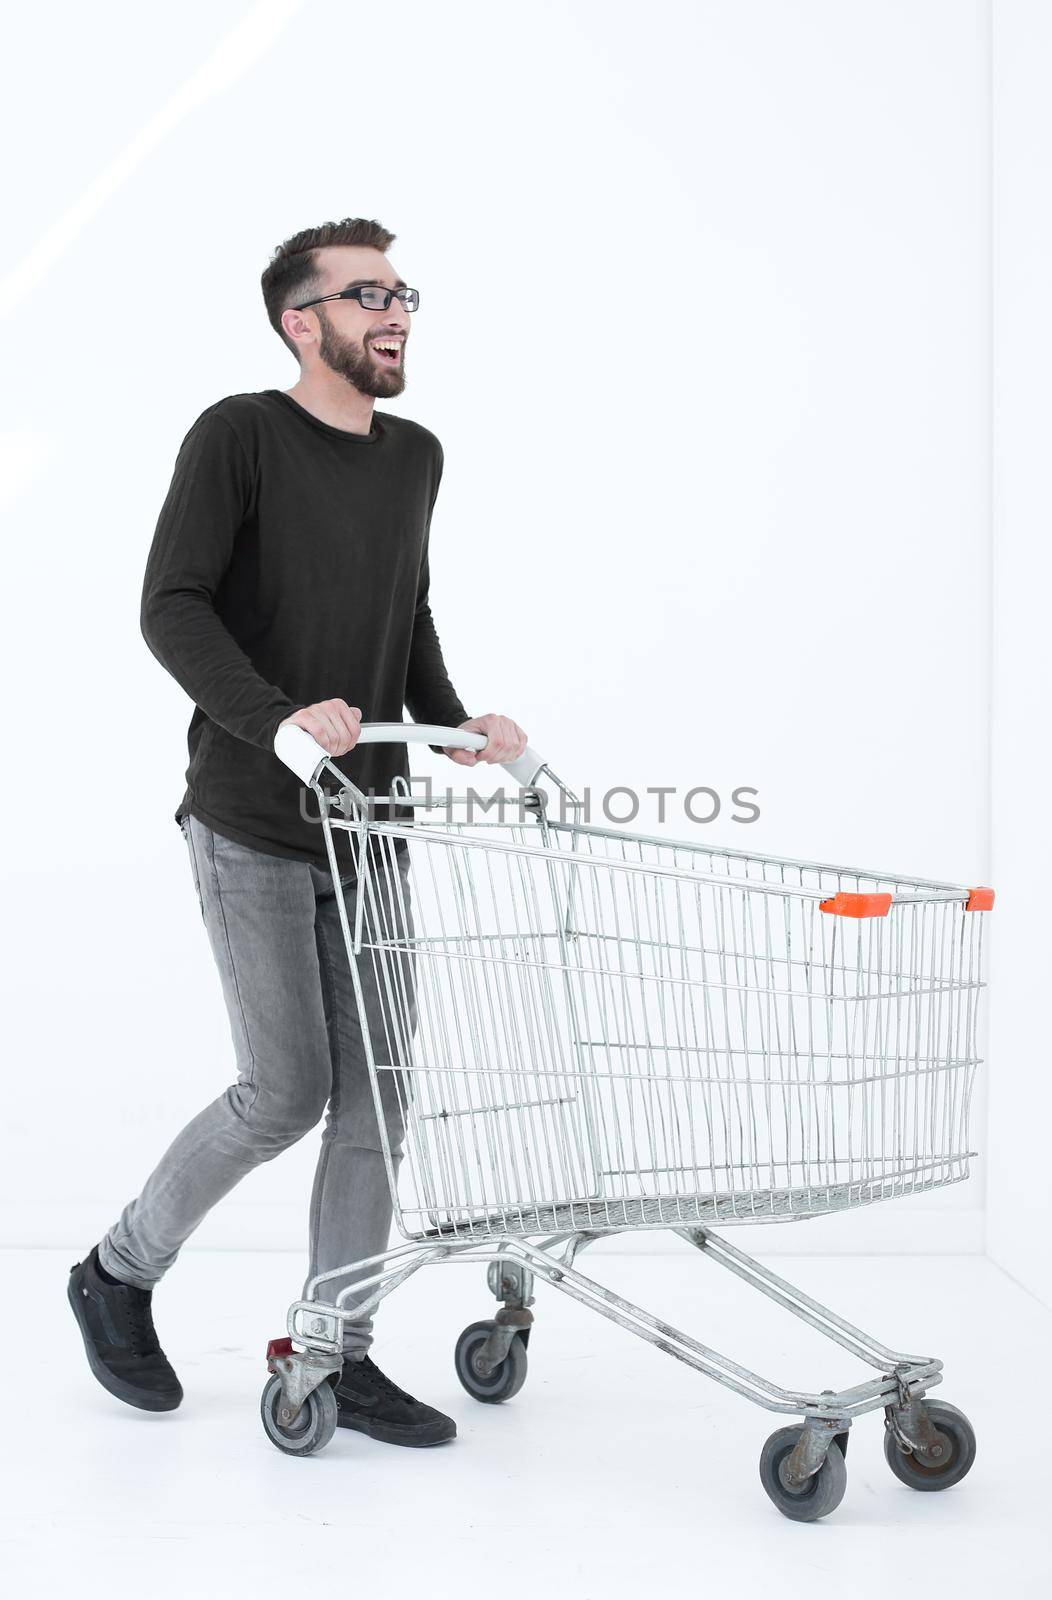 Young man running and pushing an empty shopping cart isolated on white background